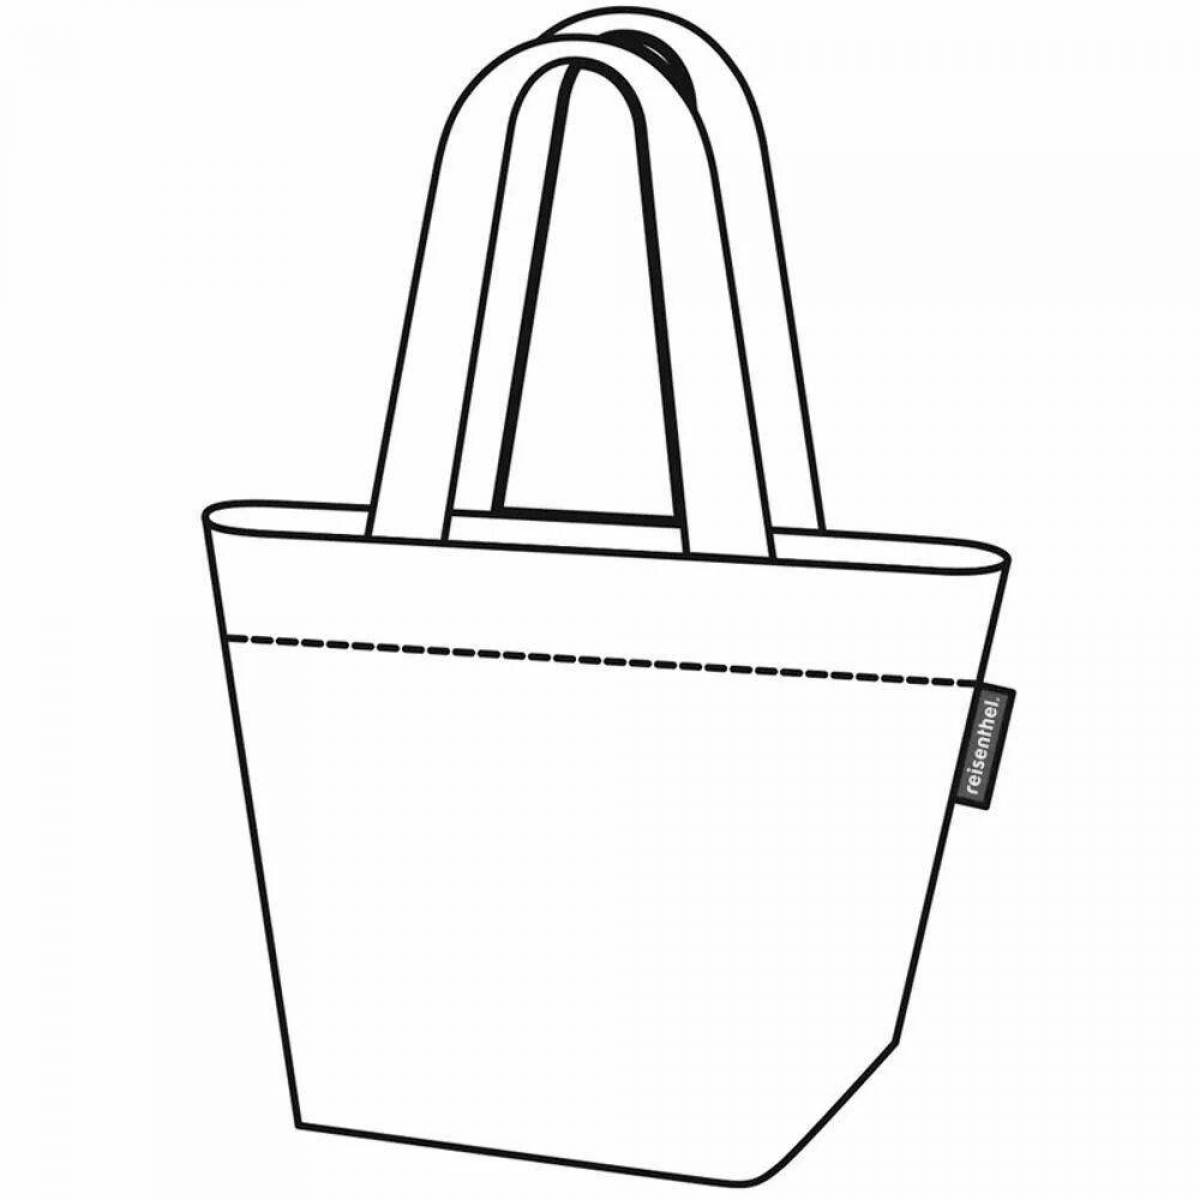 Sweet shopping bag coloring page